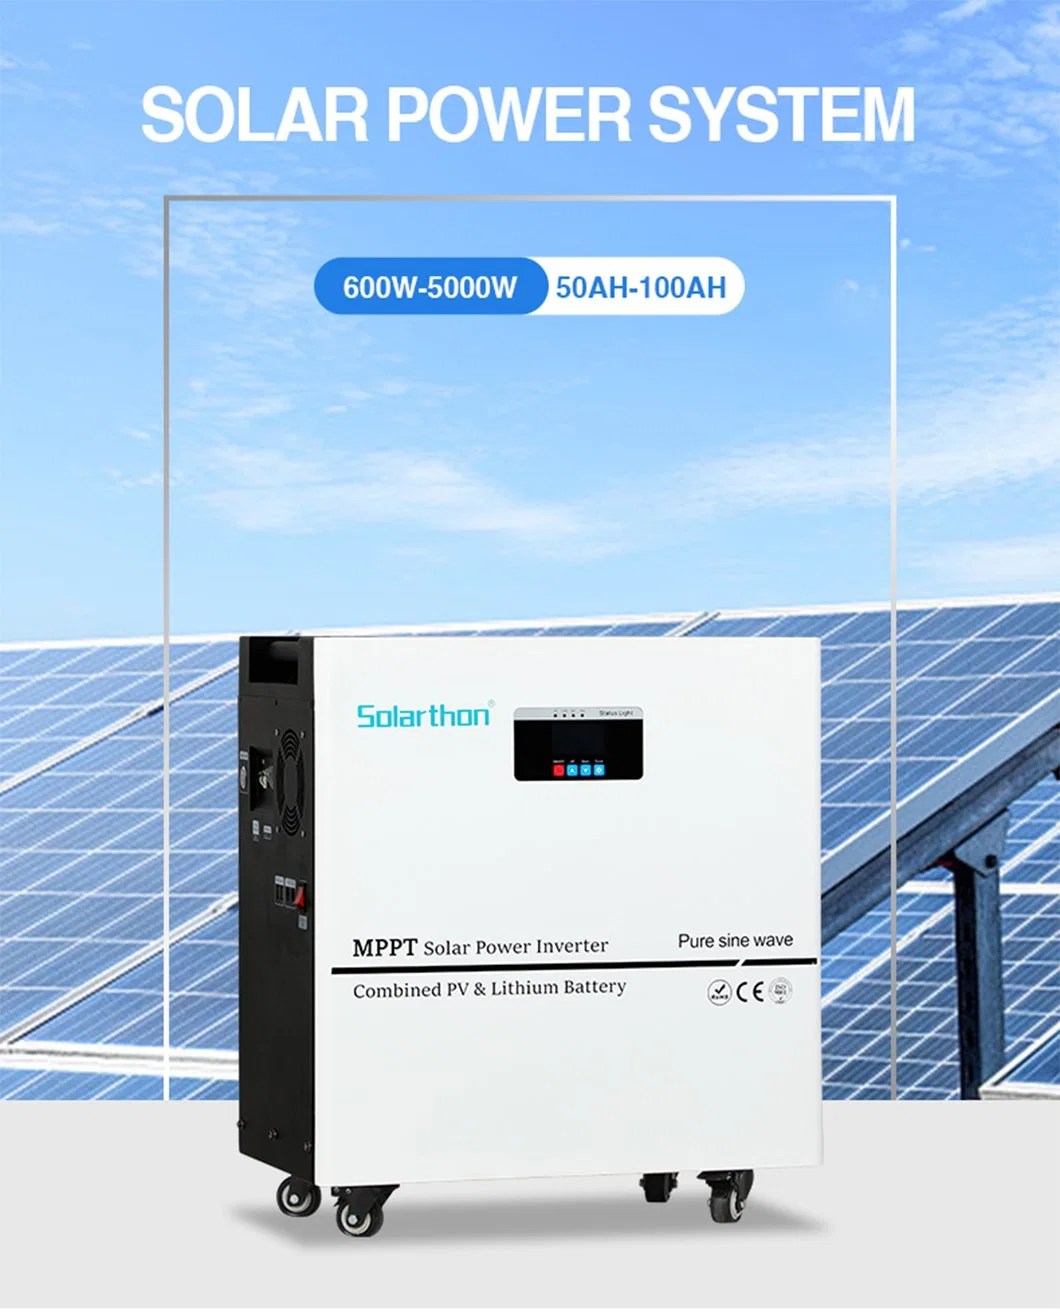 Complete Set All in One Hybrid Solar Power Inverter 5kw on off Grid Solar Panel System Photovoltaic Wall Mounted 3500W Solar Energy Home System